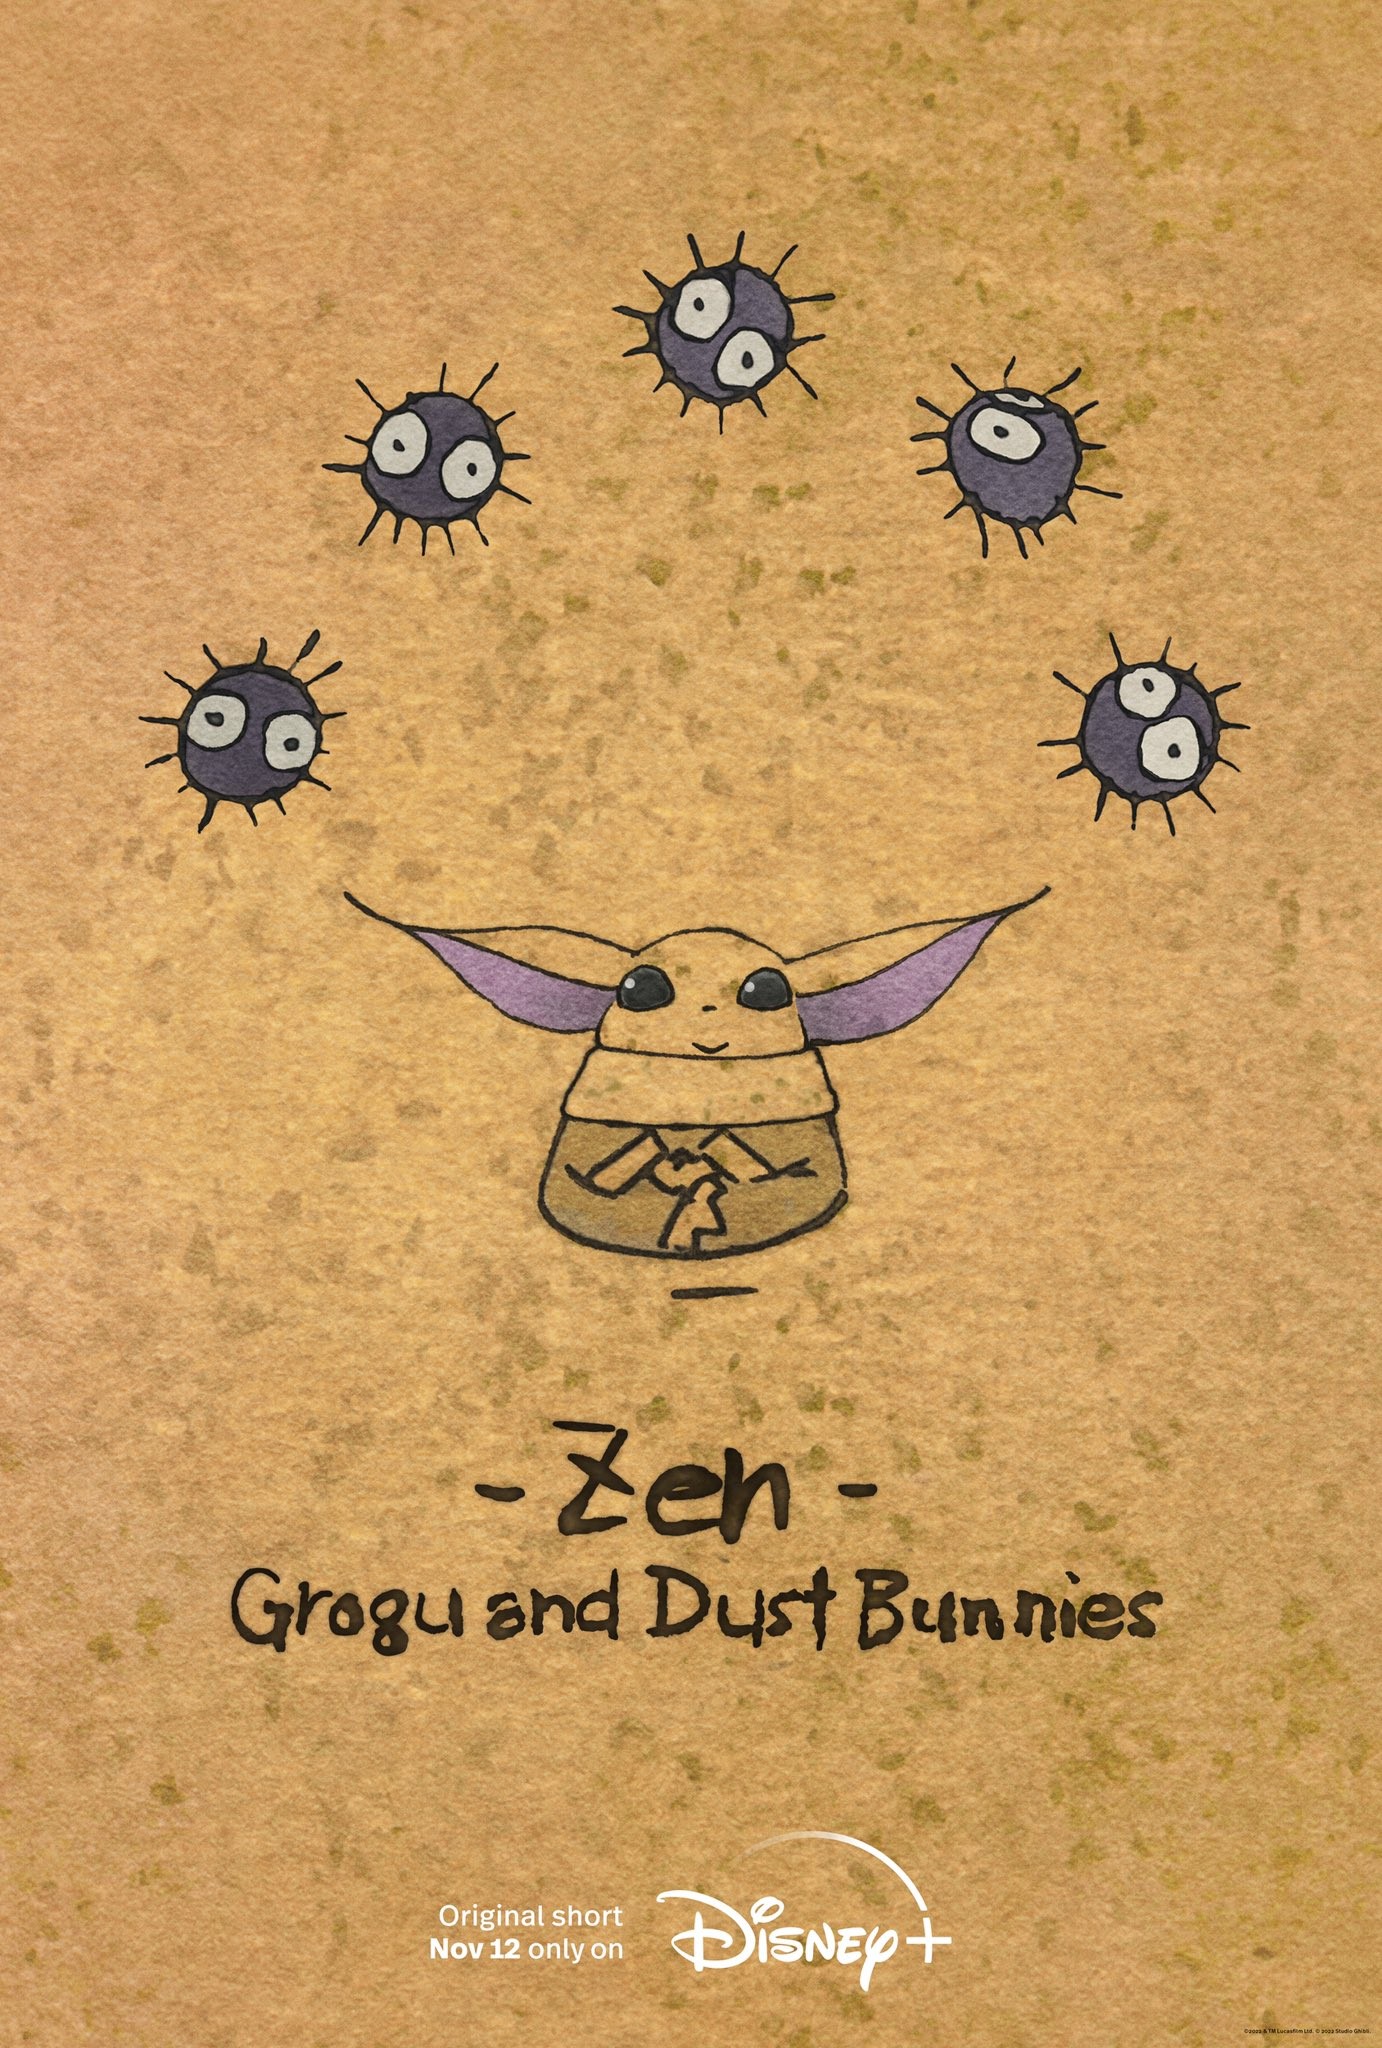 Mega Sized Movie Poster Image for Zen - Grogu and Dust Bunnies